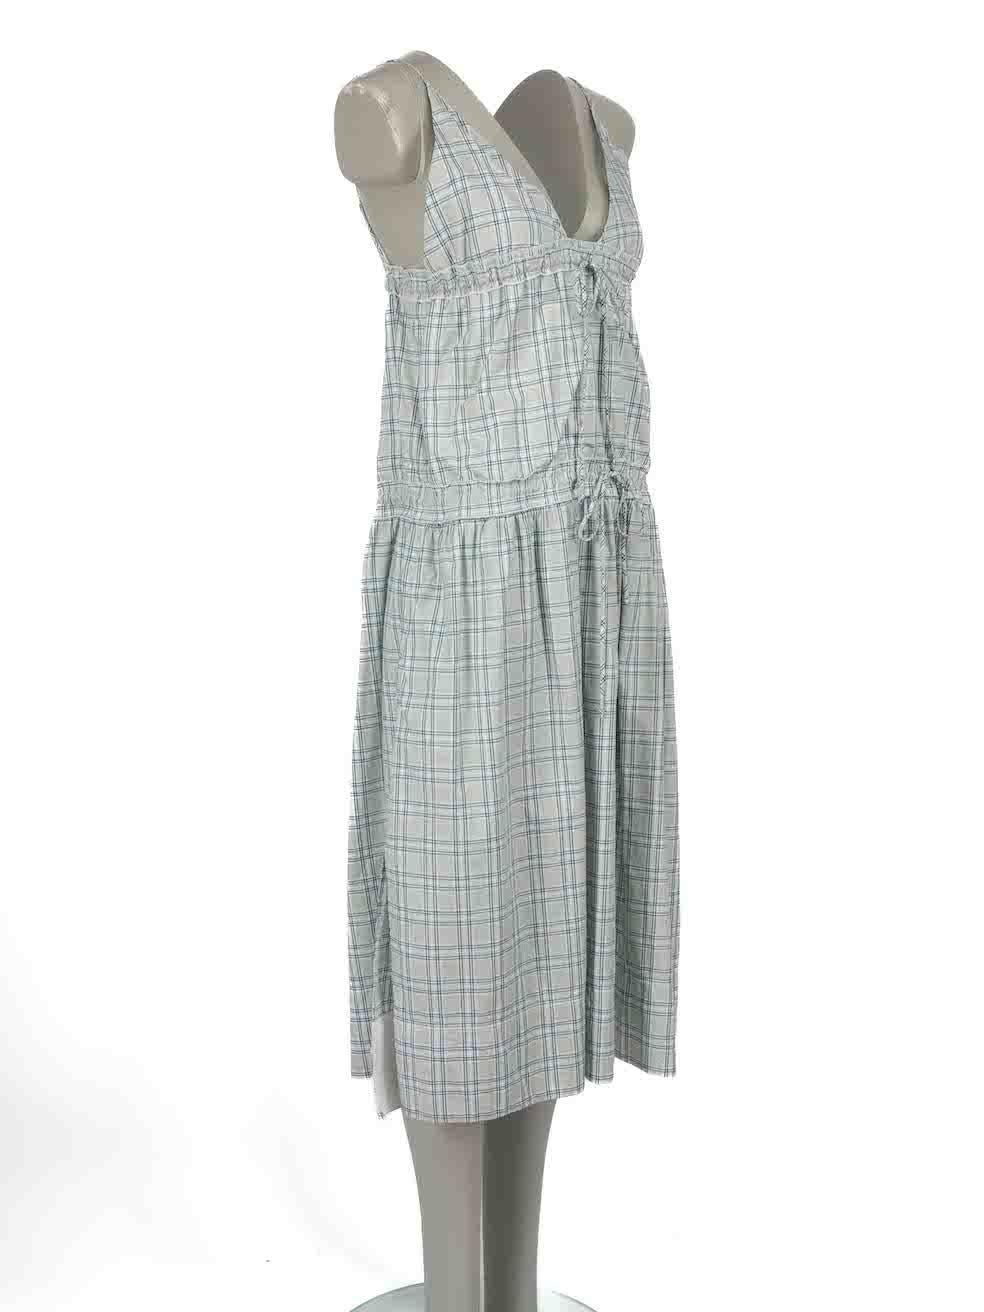 CONDITION is Very good. Hardly any visible wear to dress is evident on this used VVB designer resale item.
 
Details
Green
Cotton
Dress
Tartan print
Sleeveless
Open back
V-neck
Midi
Drawstring bust and waist
2x Side pockets
 
Made in Turkey
